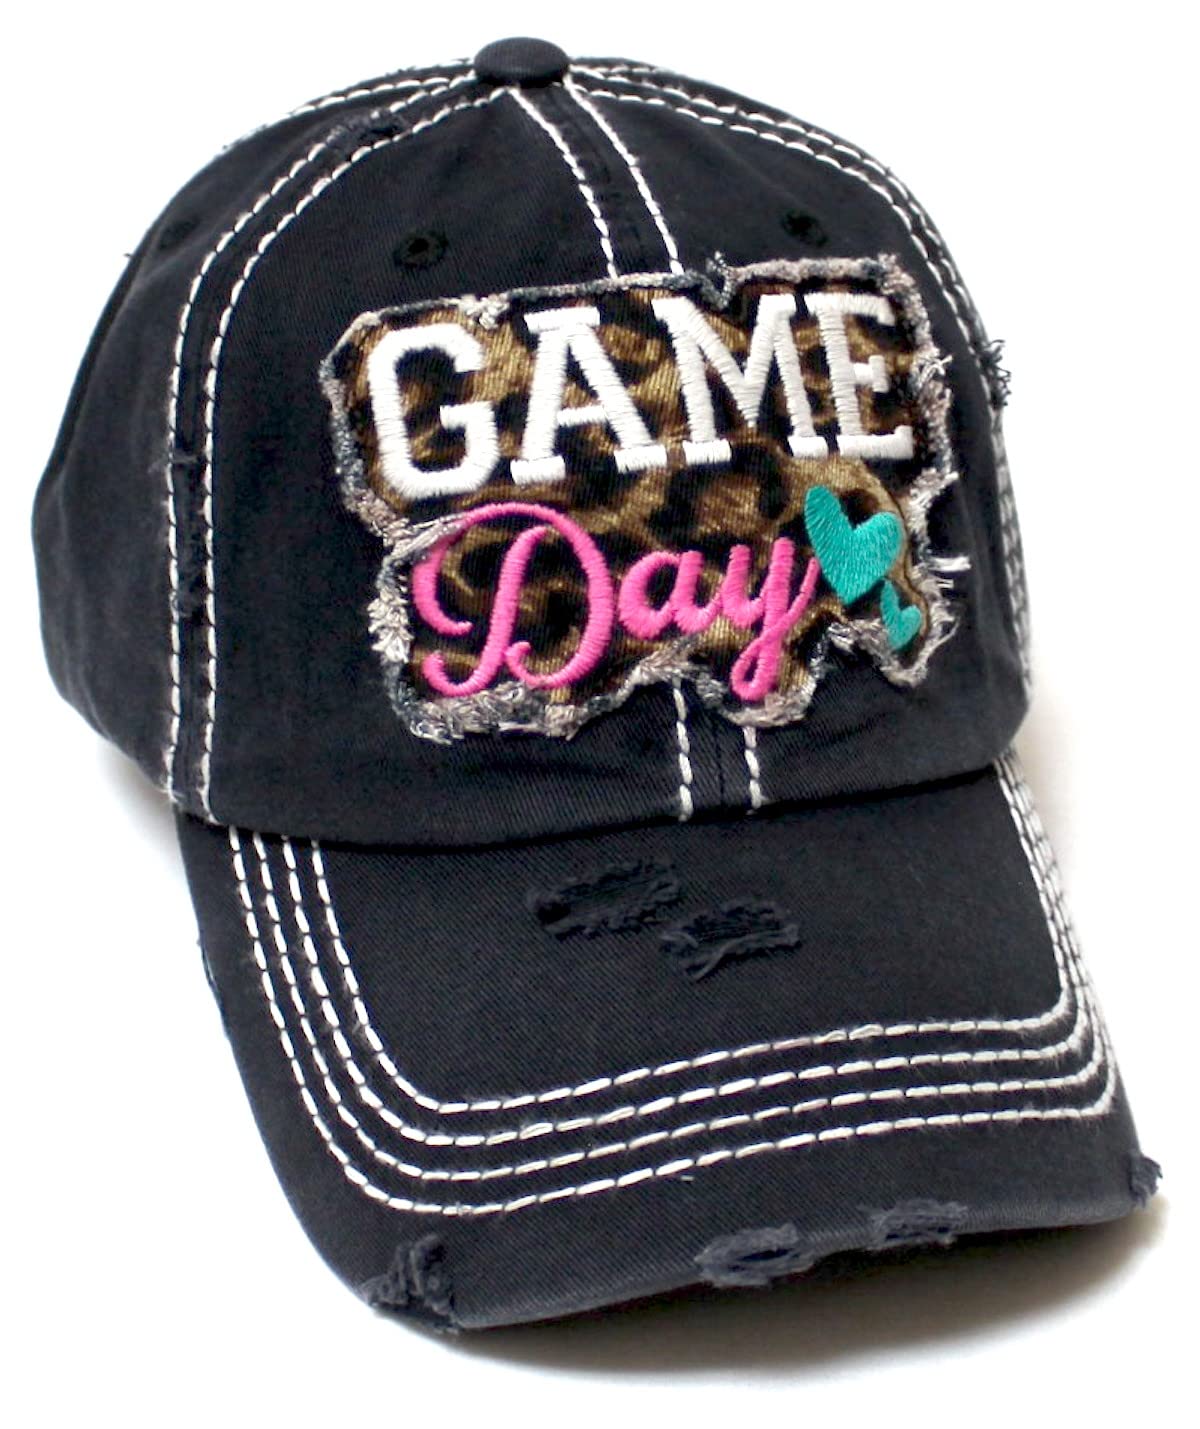 Women's Ballcap Game Day Leopard Print Patch Embroidery Monogram Hat, Black